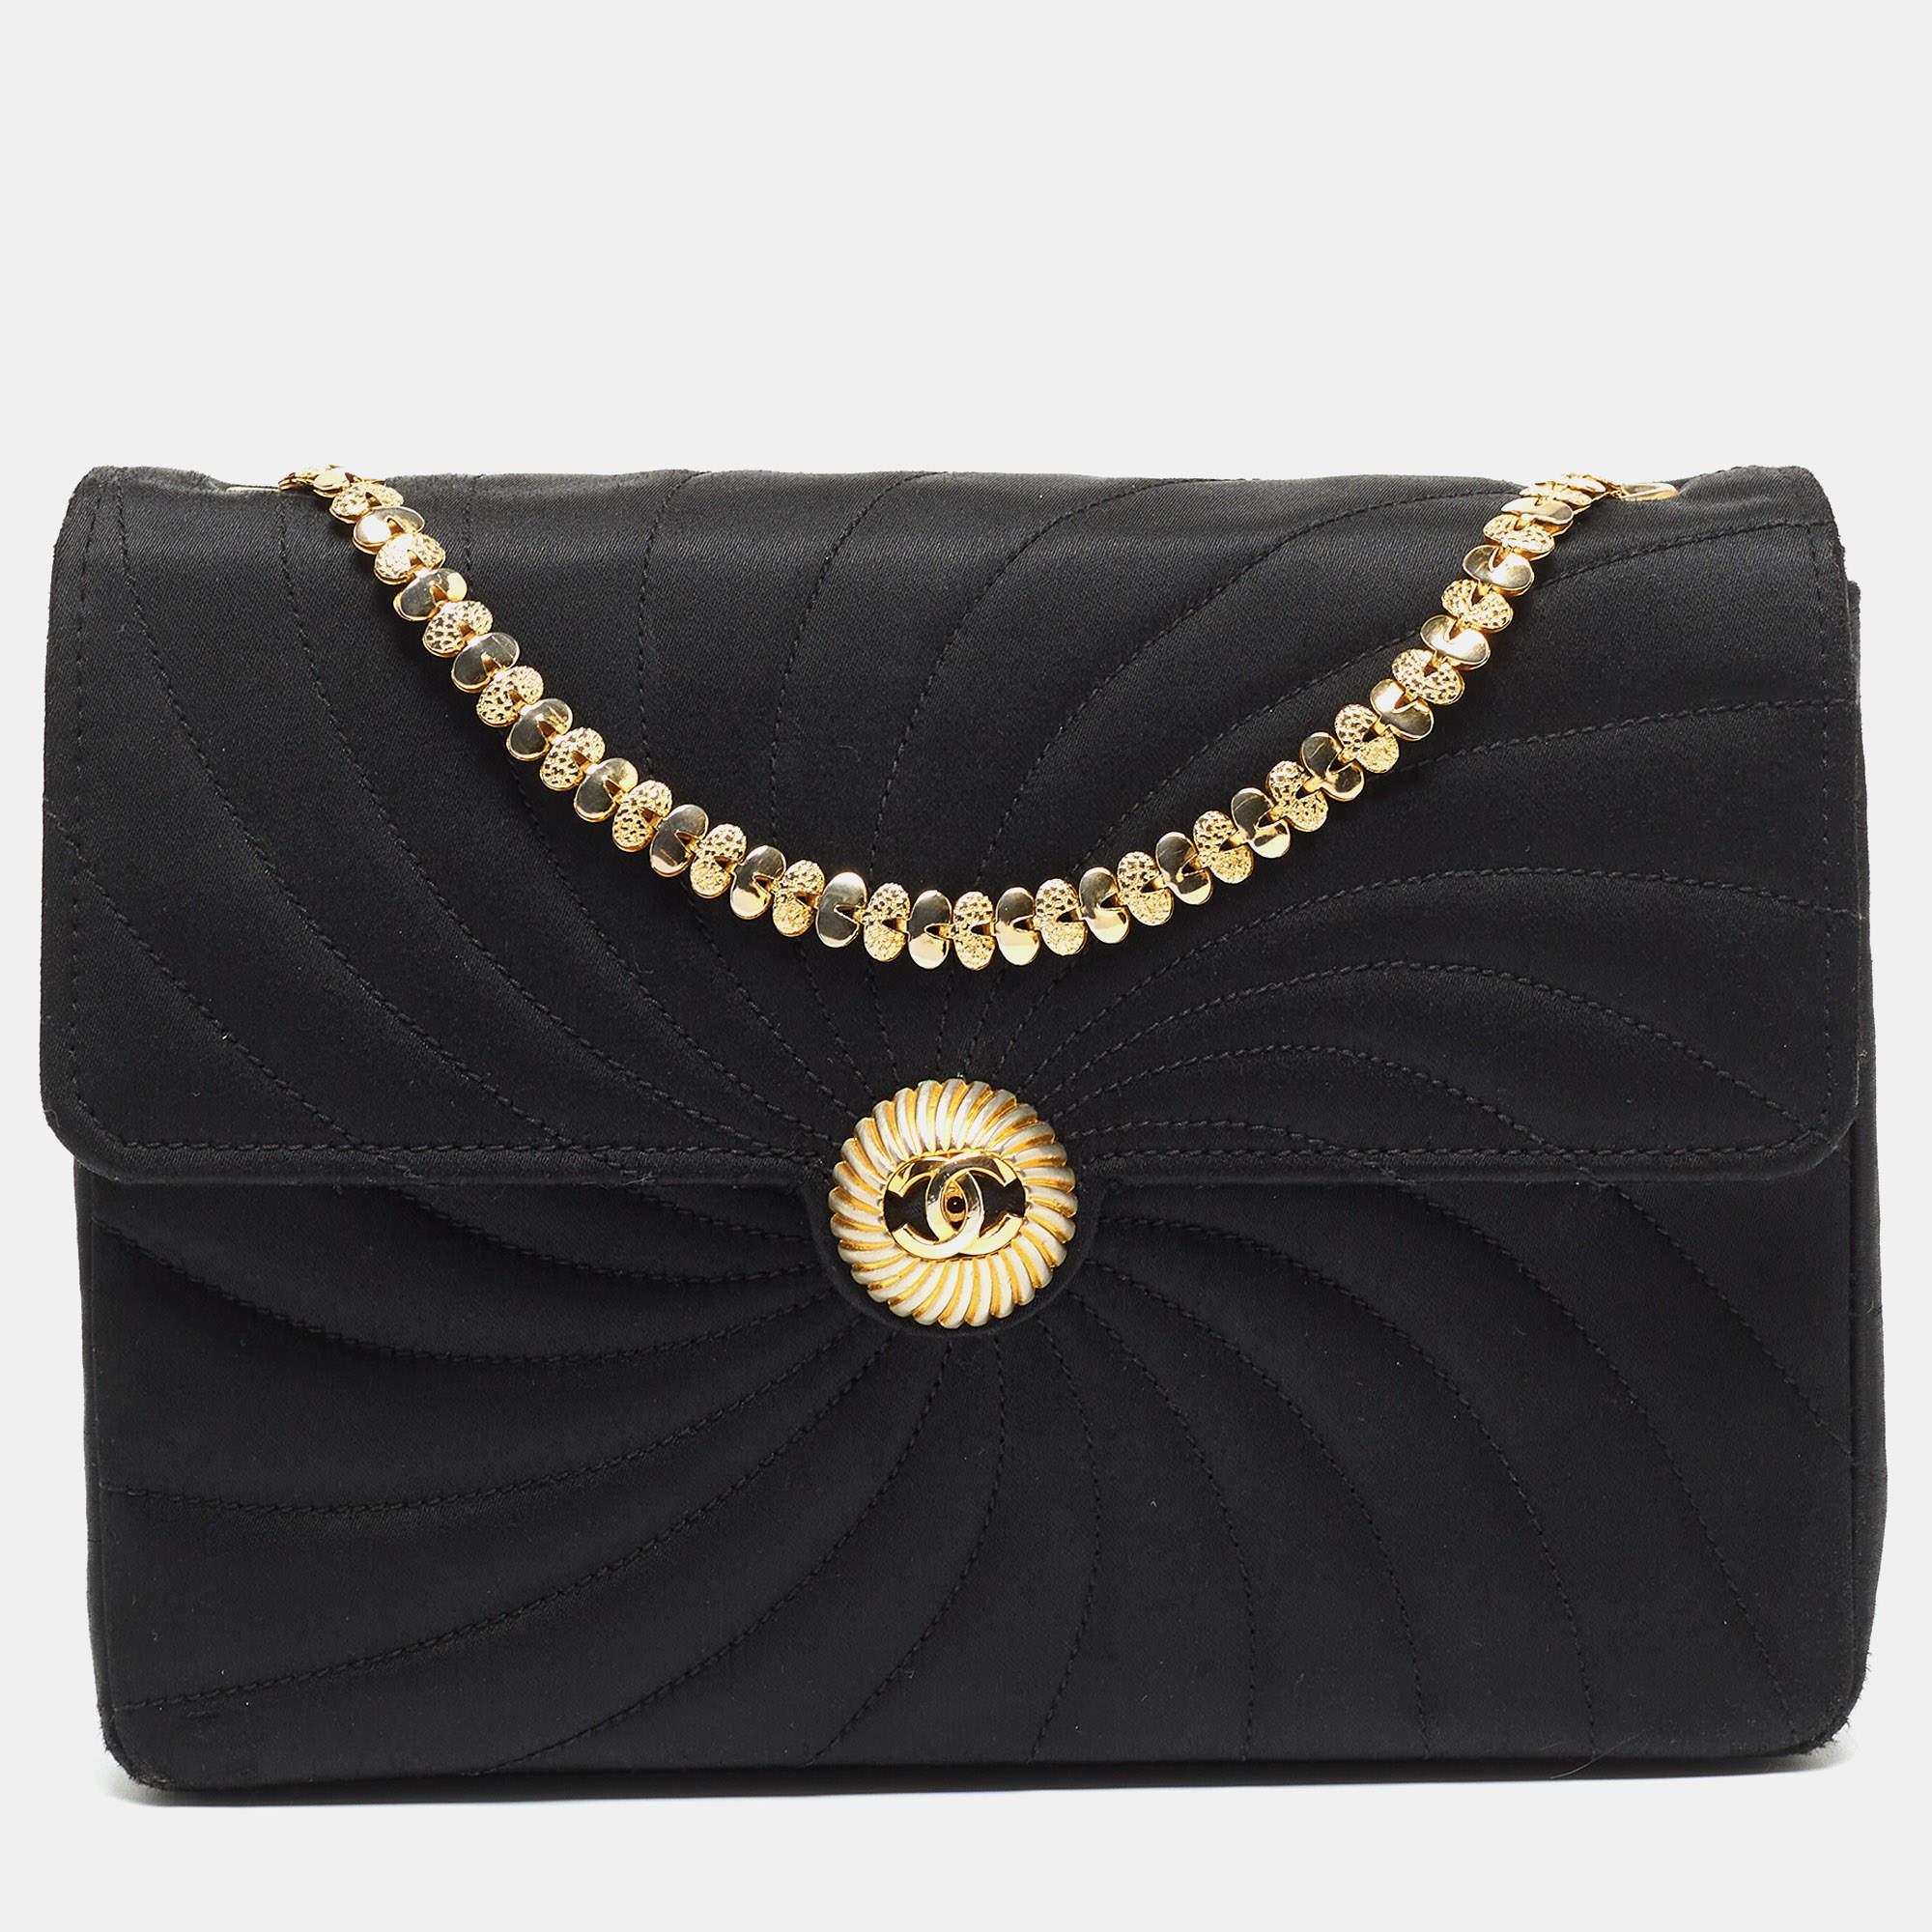 Chanel Black Quilted Satin Mini Flap Bag with Gold Hardware. , Lot  #76013